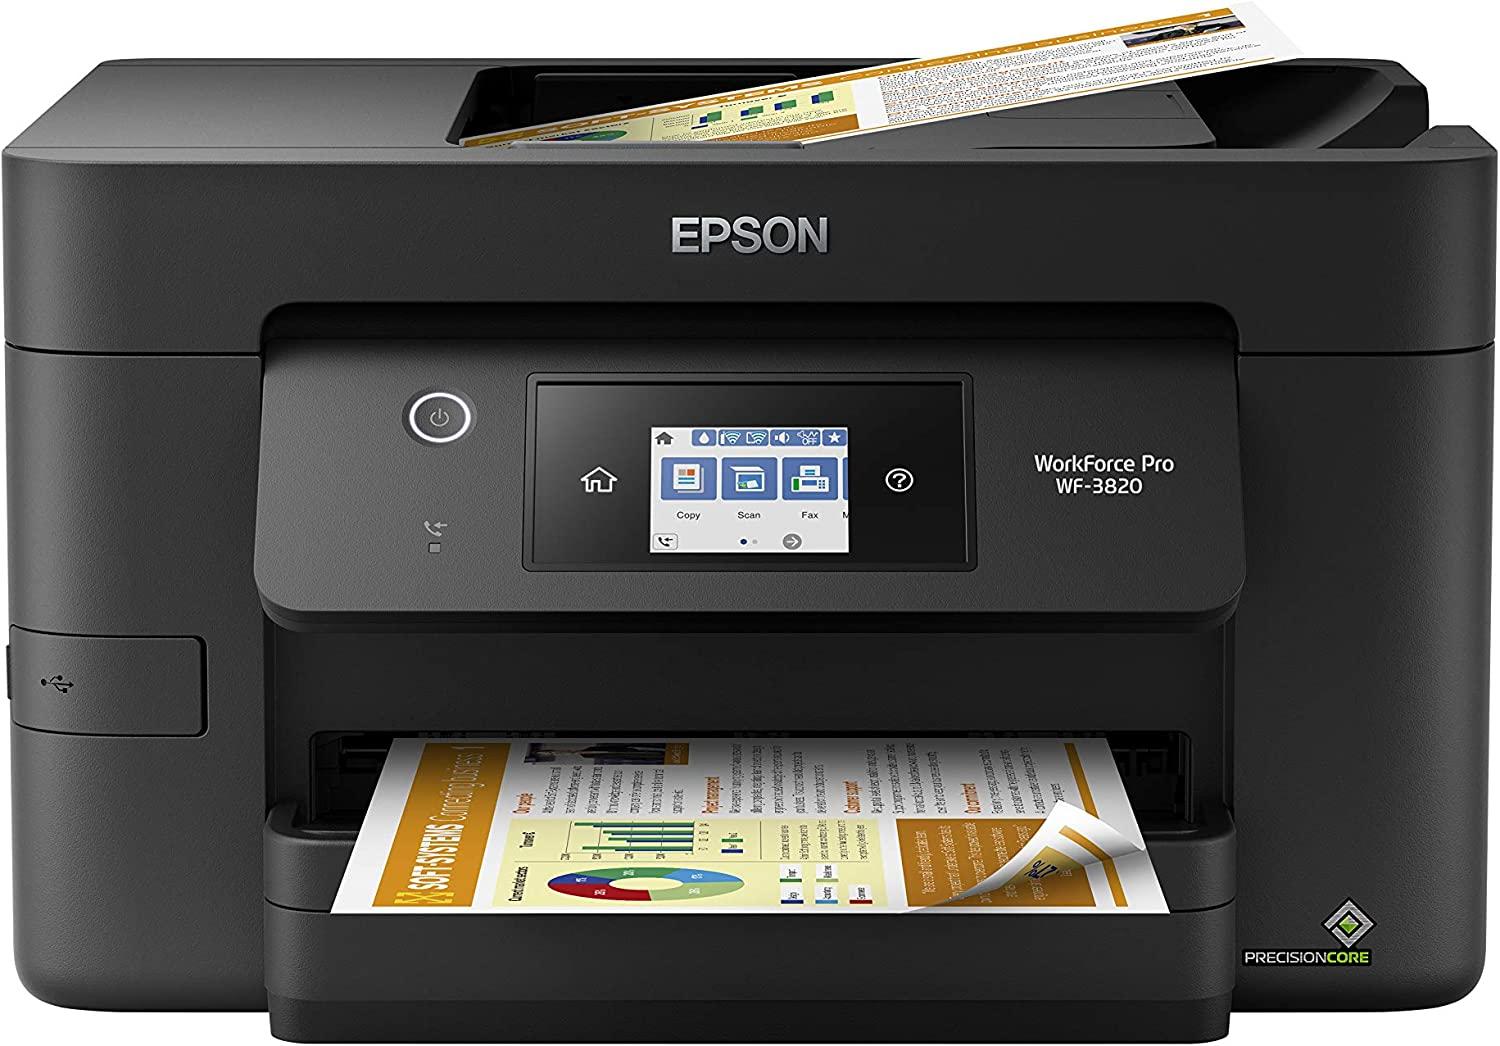 Epson Workforce Pro WF-3820 Color Inkjet All-in-One Printer for $79.99 Shipped